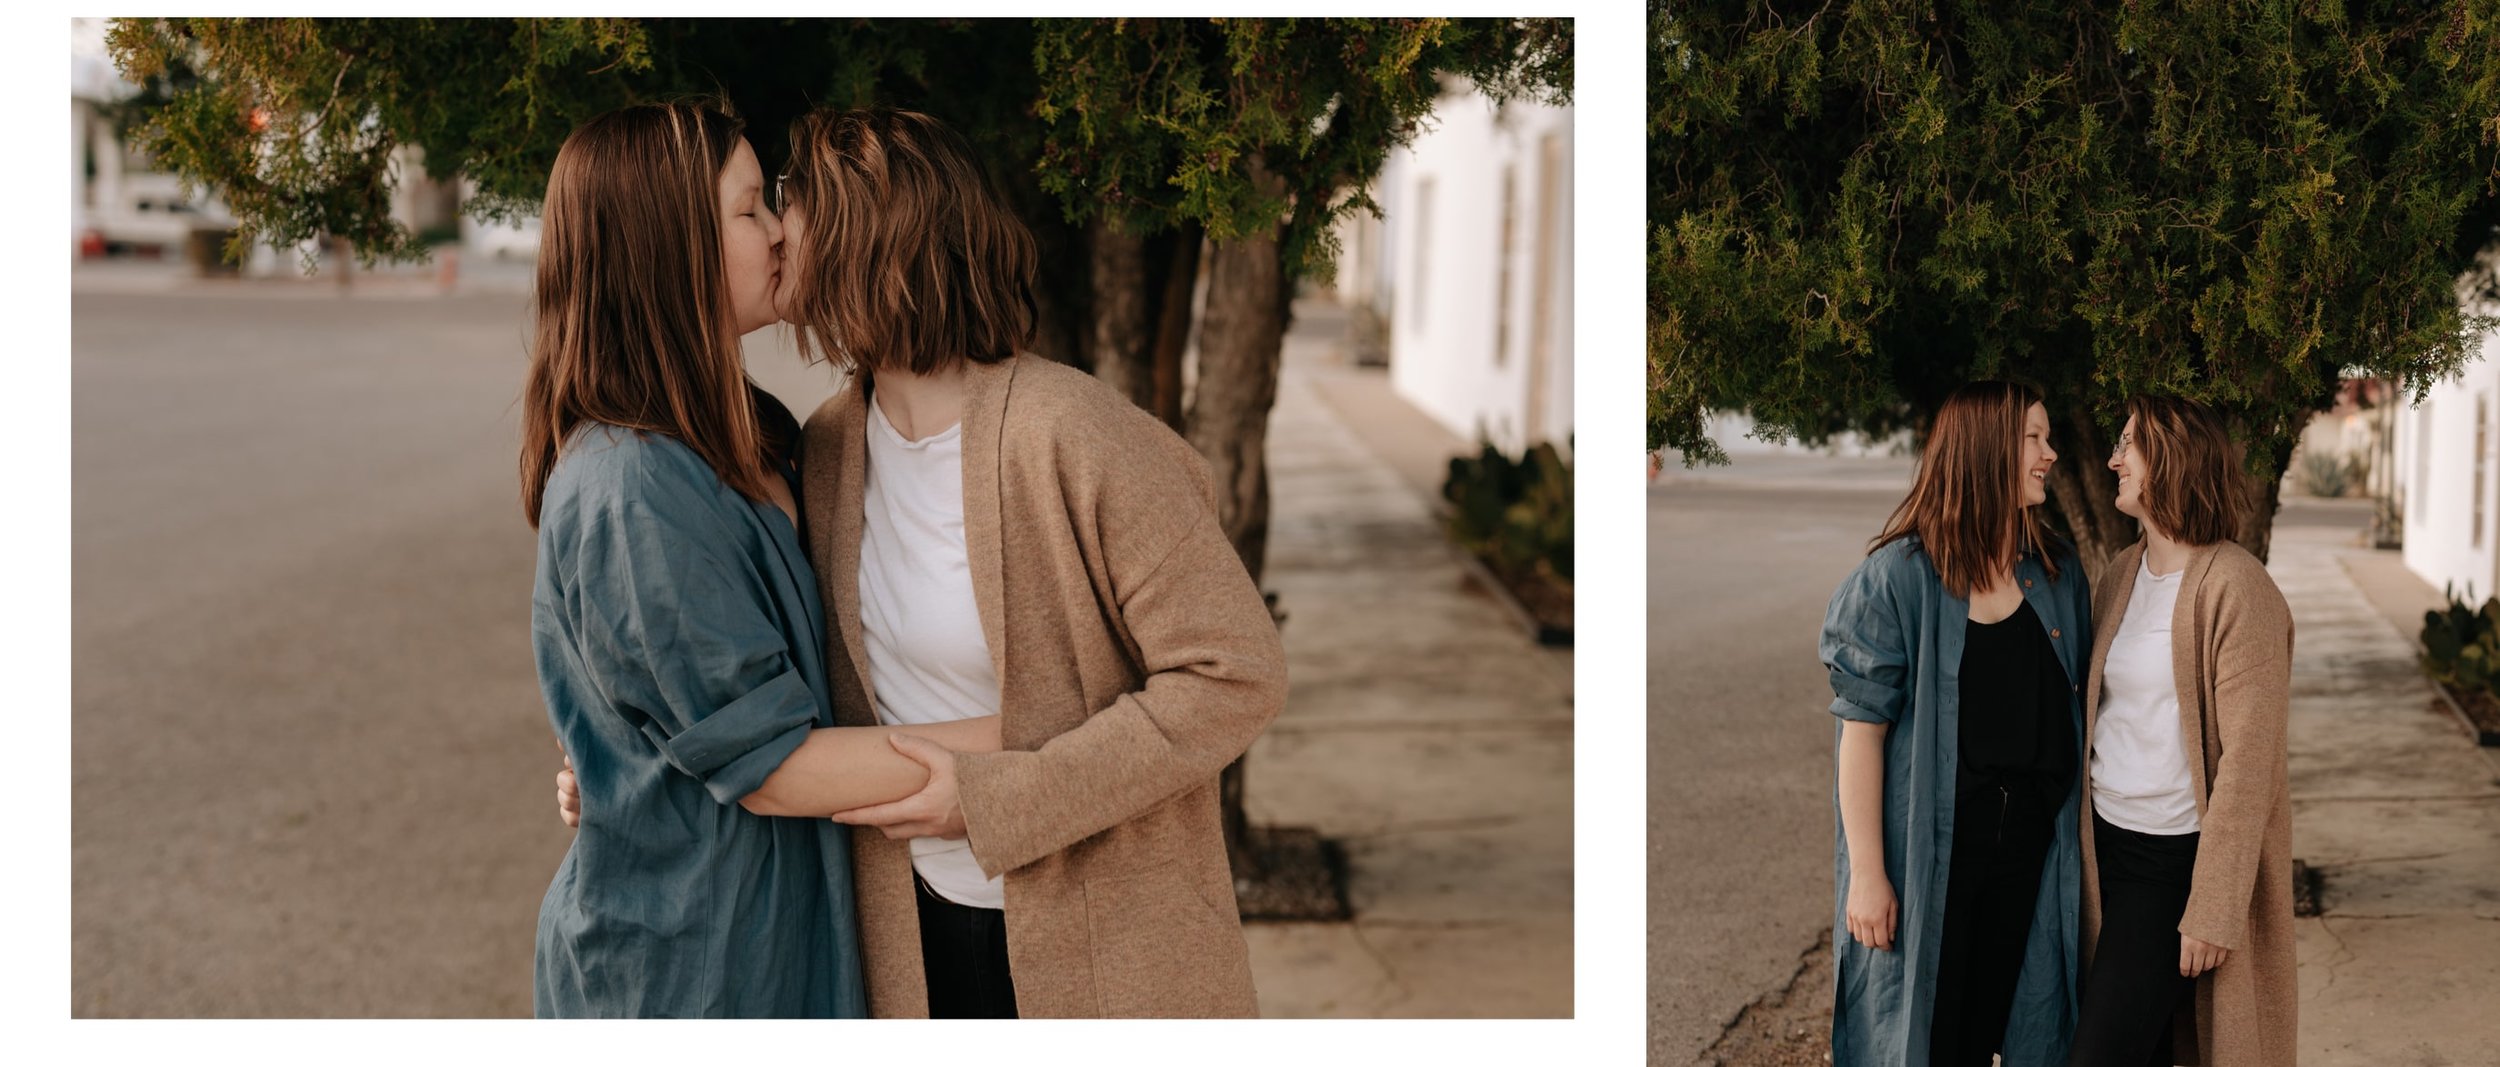 A couple kisses in front of a tree during an engagement shoot in Marfa, Texas with j.olson weddings.